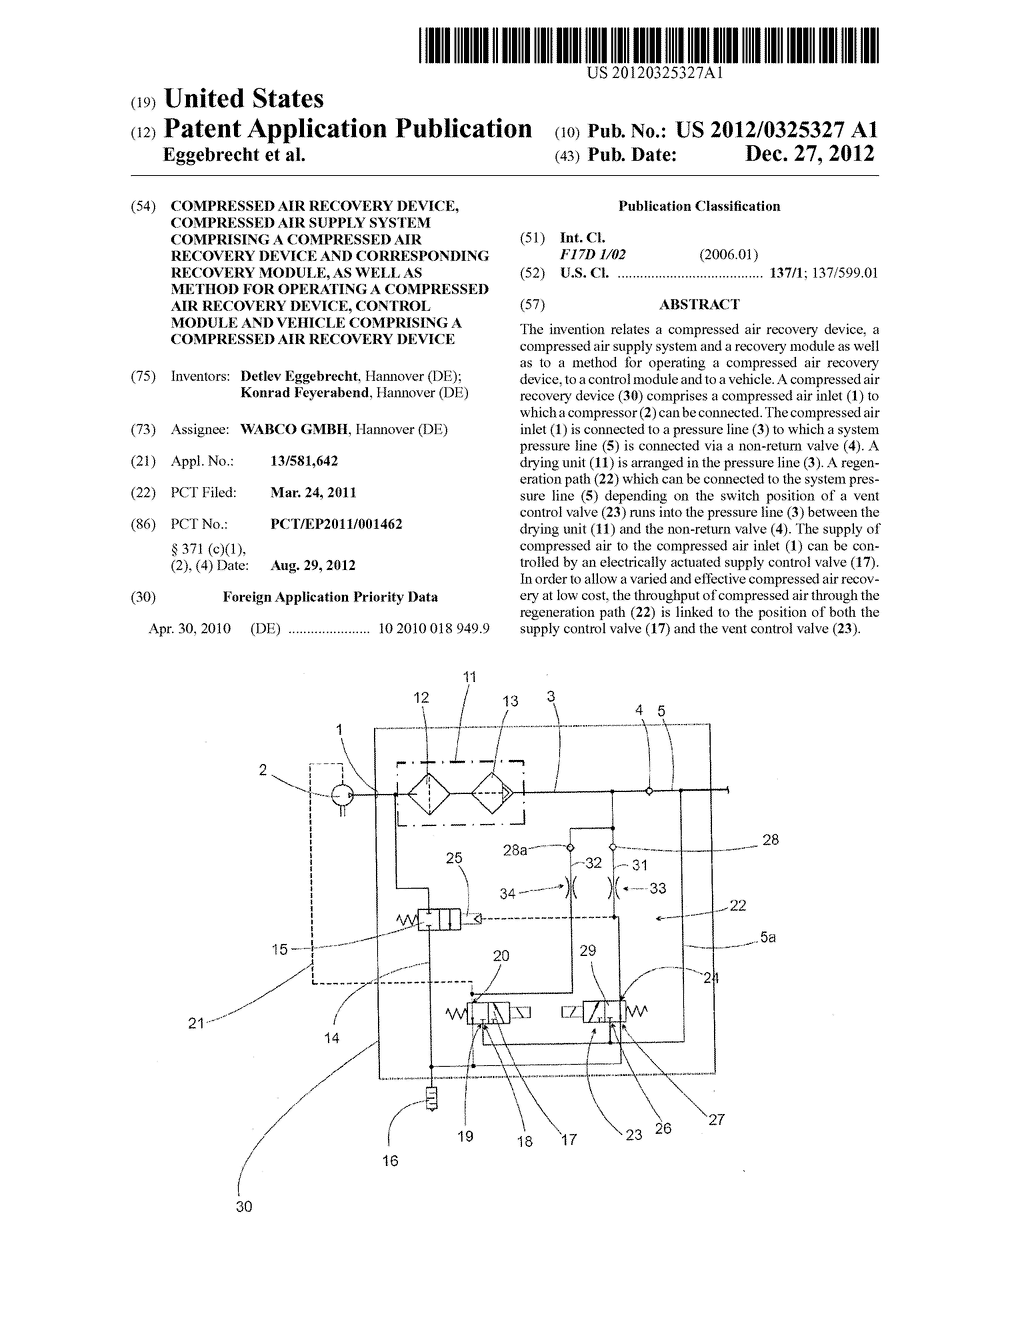 Compressed Air Recovery Device, Compressed Air Supply System Comprising a     Compressed Air Recovery Device and Corresponding Recovery Module, As Well     As Method for Operating a Compressed Air Recovery Device, Control Module     and Vehicle Comprising a Compressed Air Recovery Device - diagram, schematic, and image 01